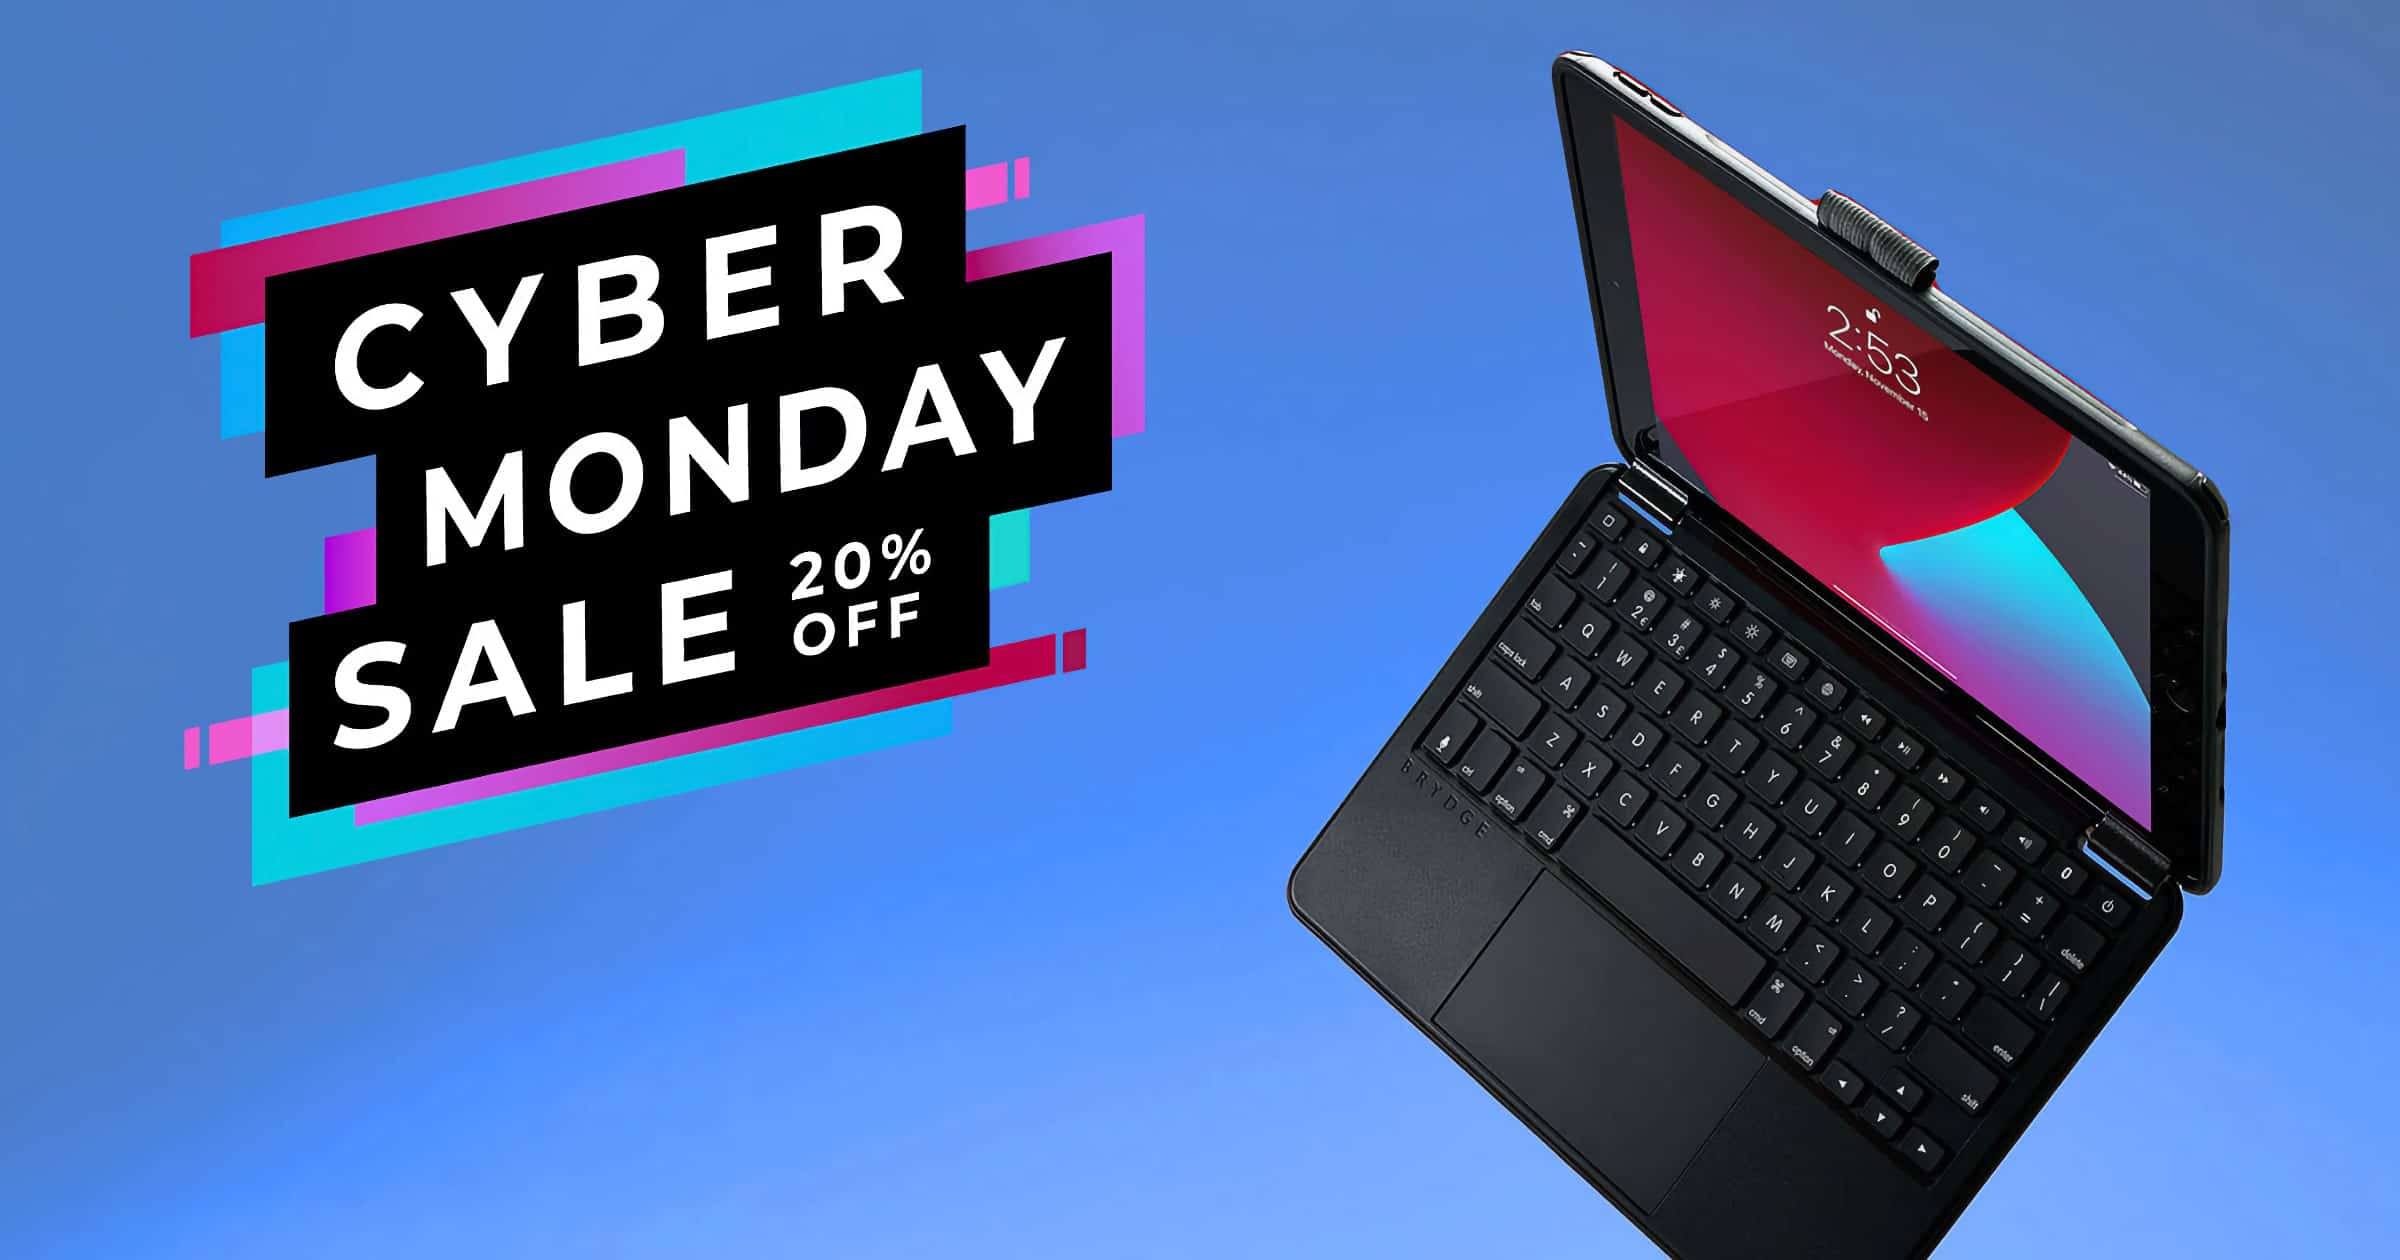 Cyber Monday 2021: Get 20% Tablet Keyboards and Docks From Brydge